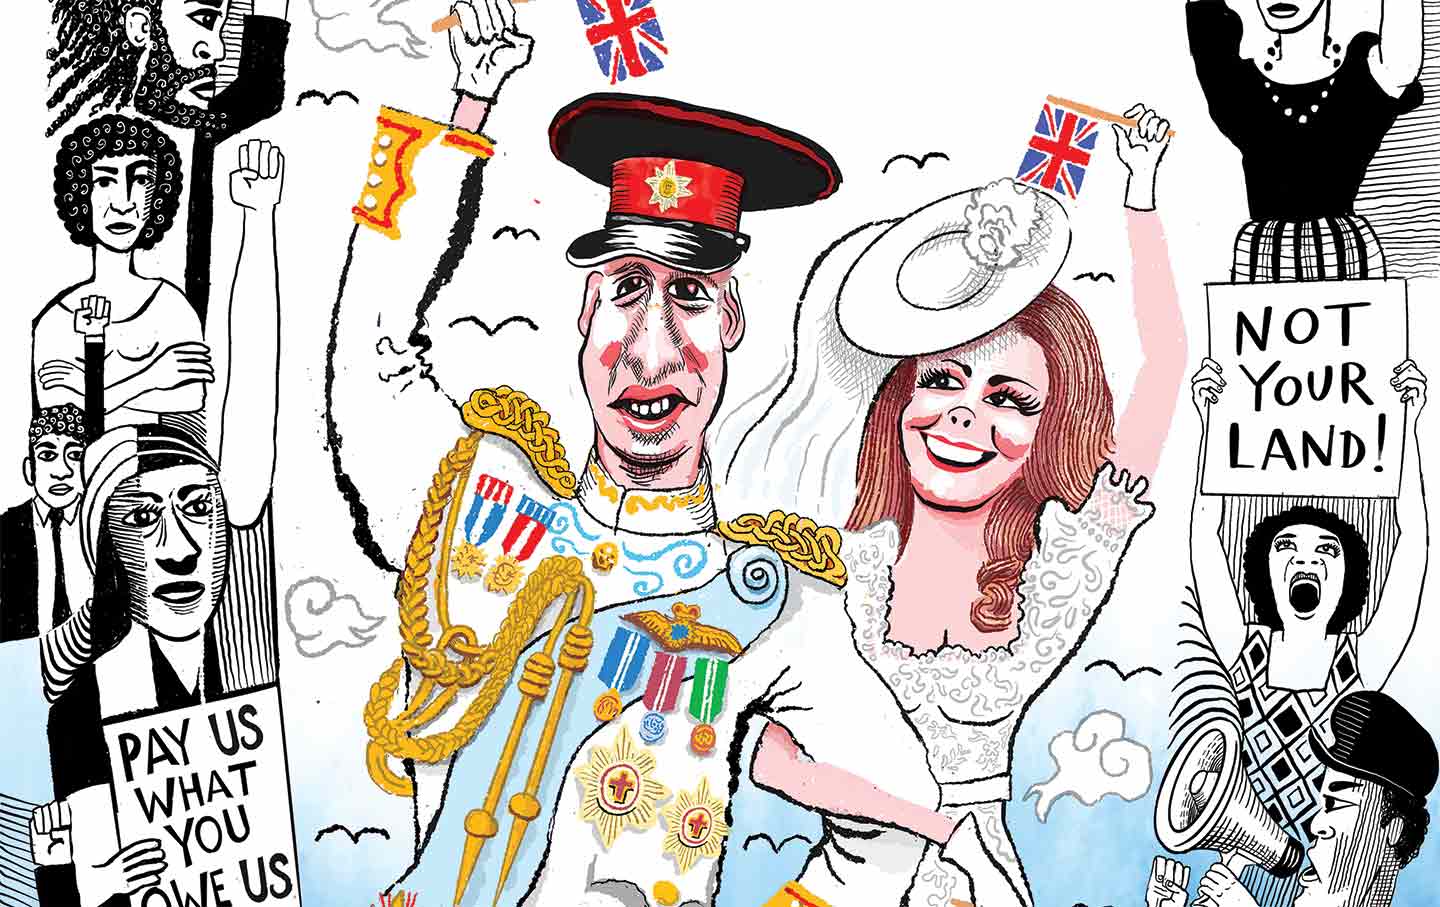 How a Royal Visit Helped Weaken the Crown’s Grip on the Caribbean